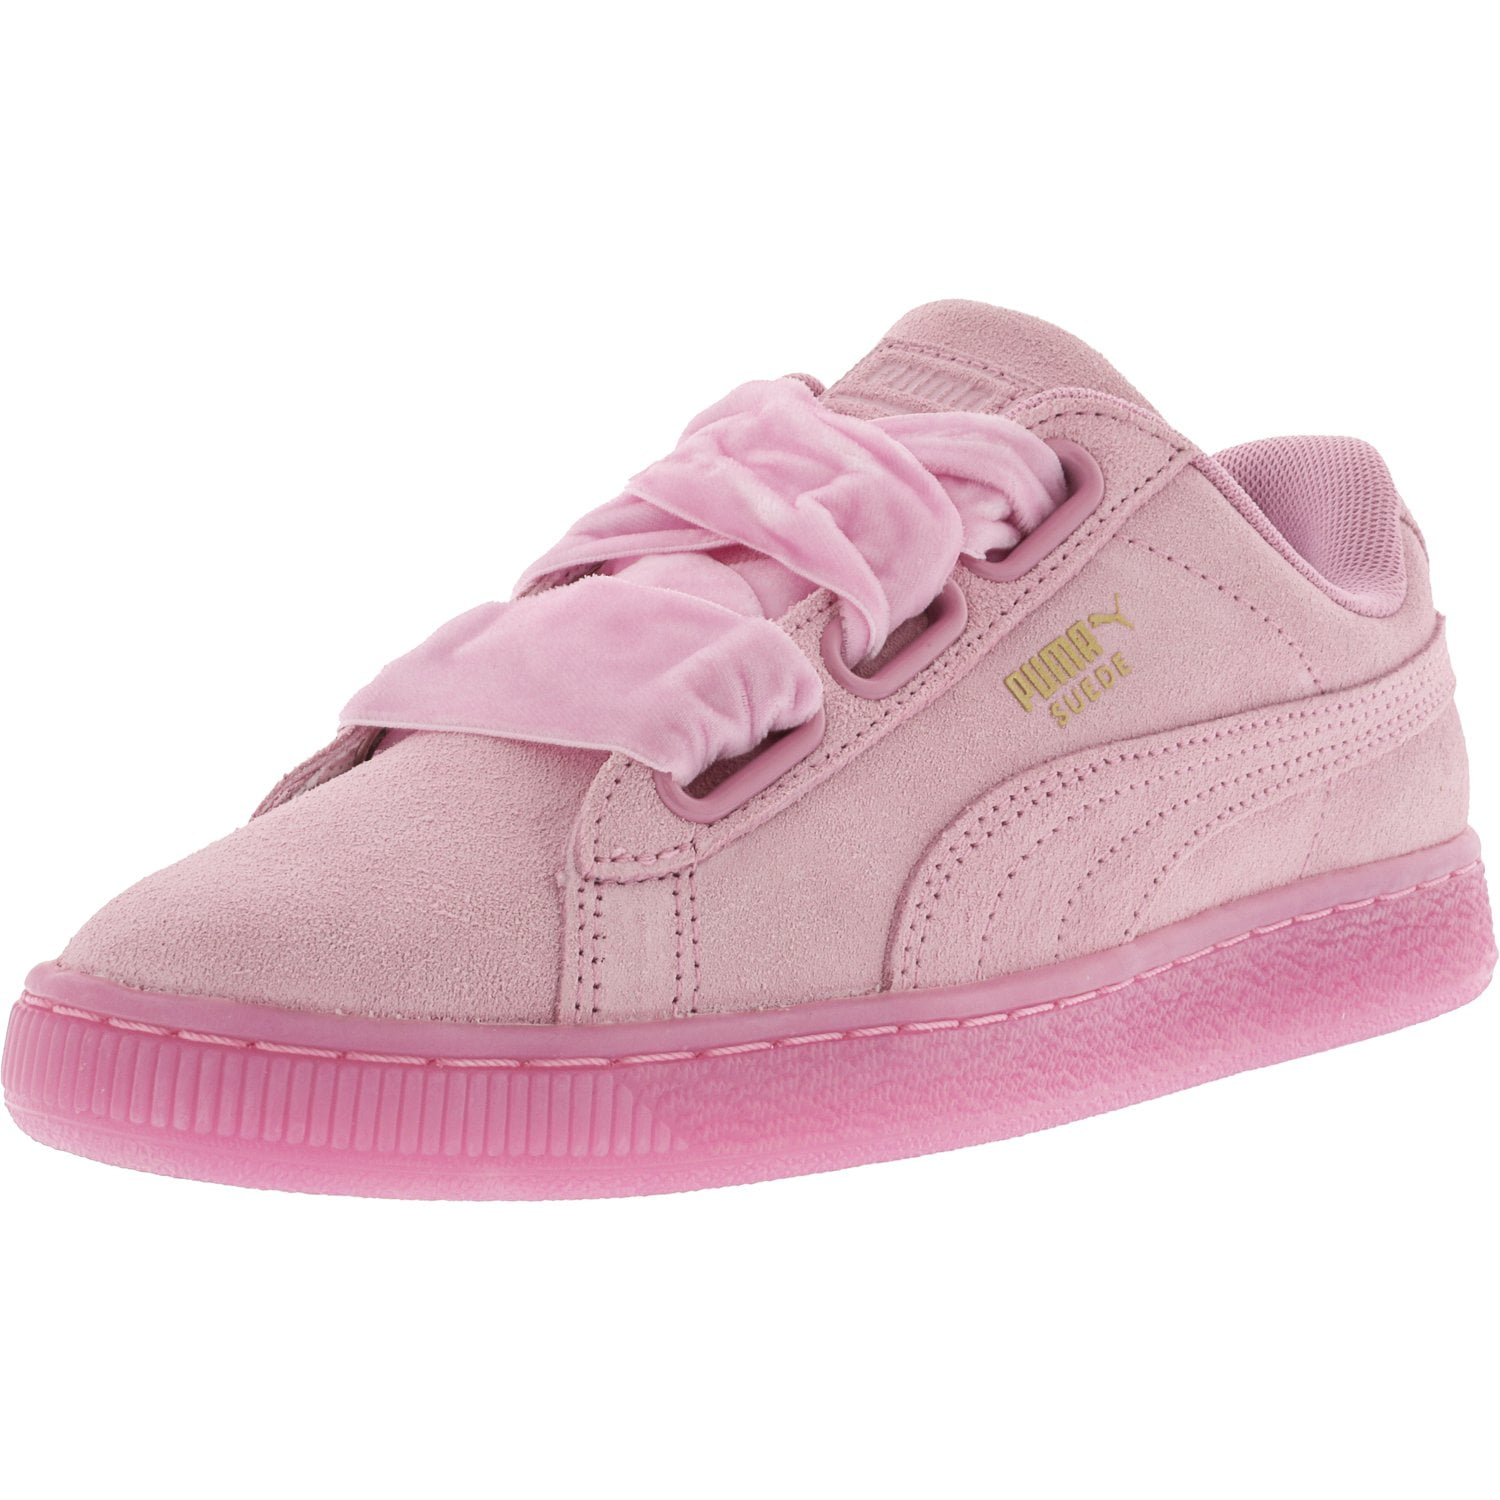 Pink Ankle-High Puma Women\'s 7.5M Fashion Prism - Suede Sneaker / Heart Reset